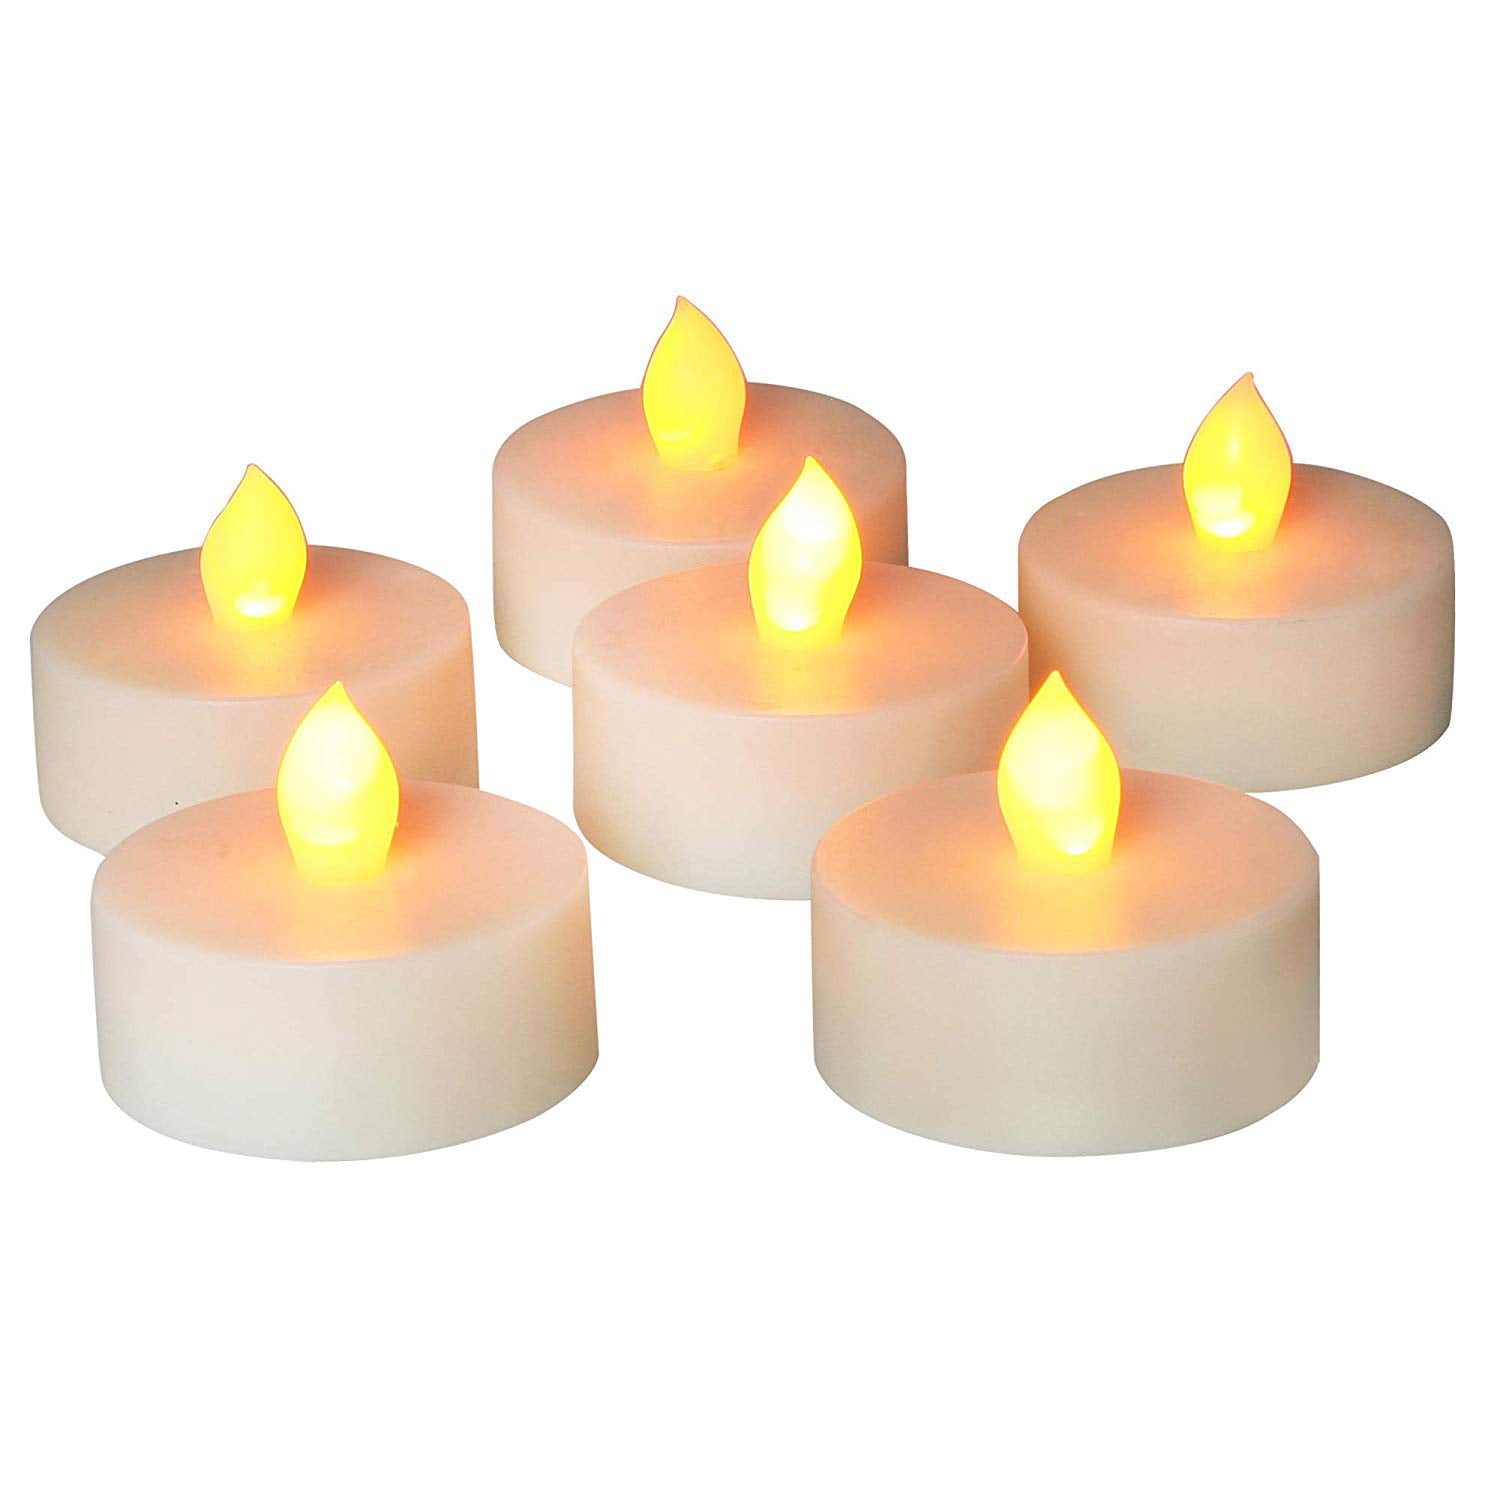 LED Tea Lights Candles Flameless Battery Operated Wedding Xmas Flicker Lamp 